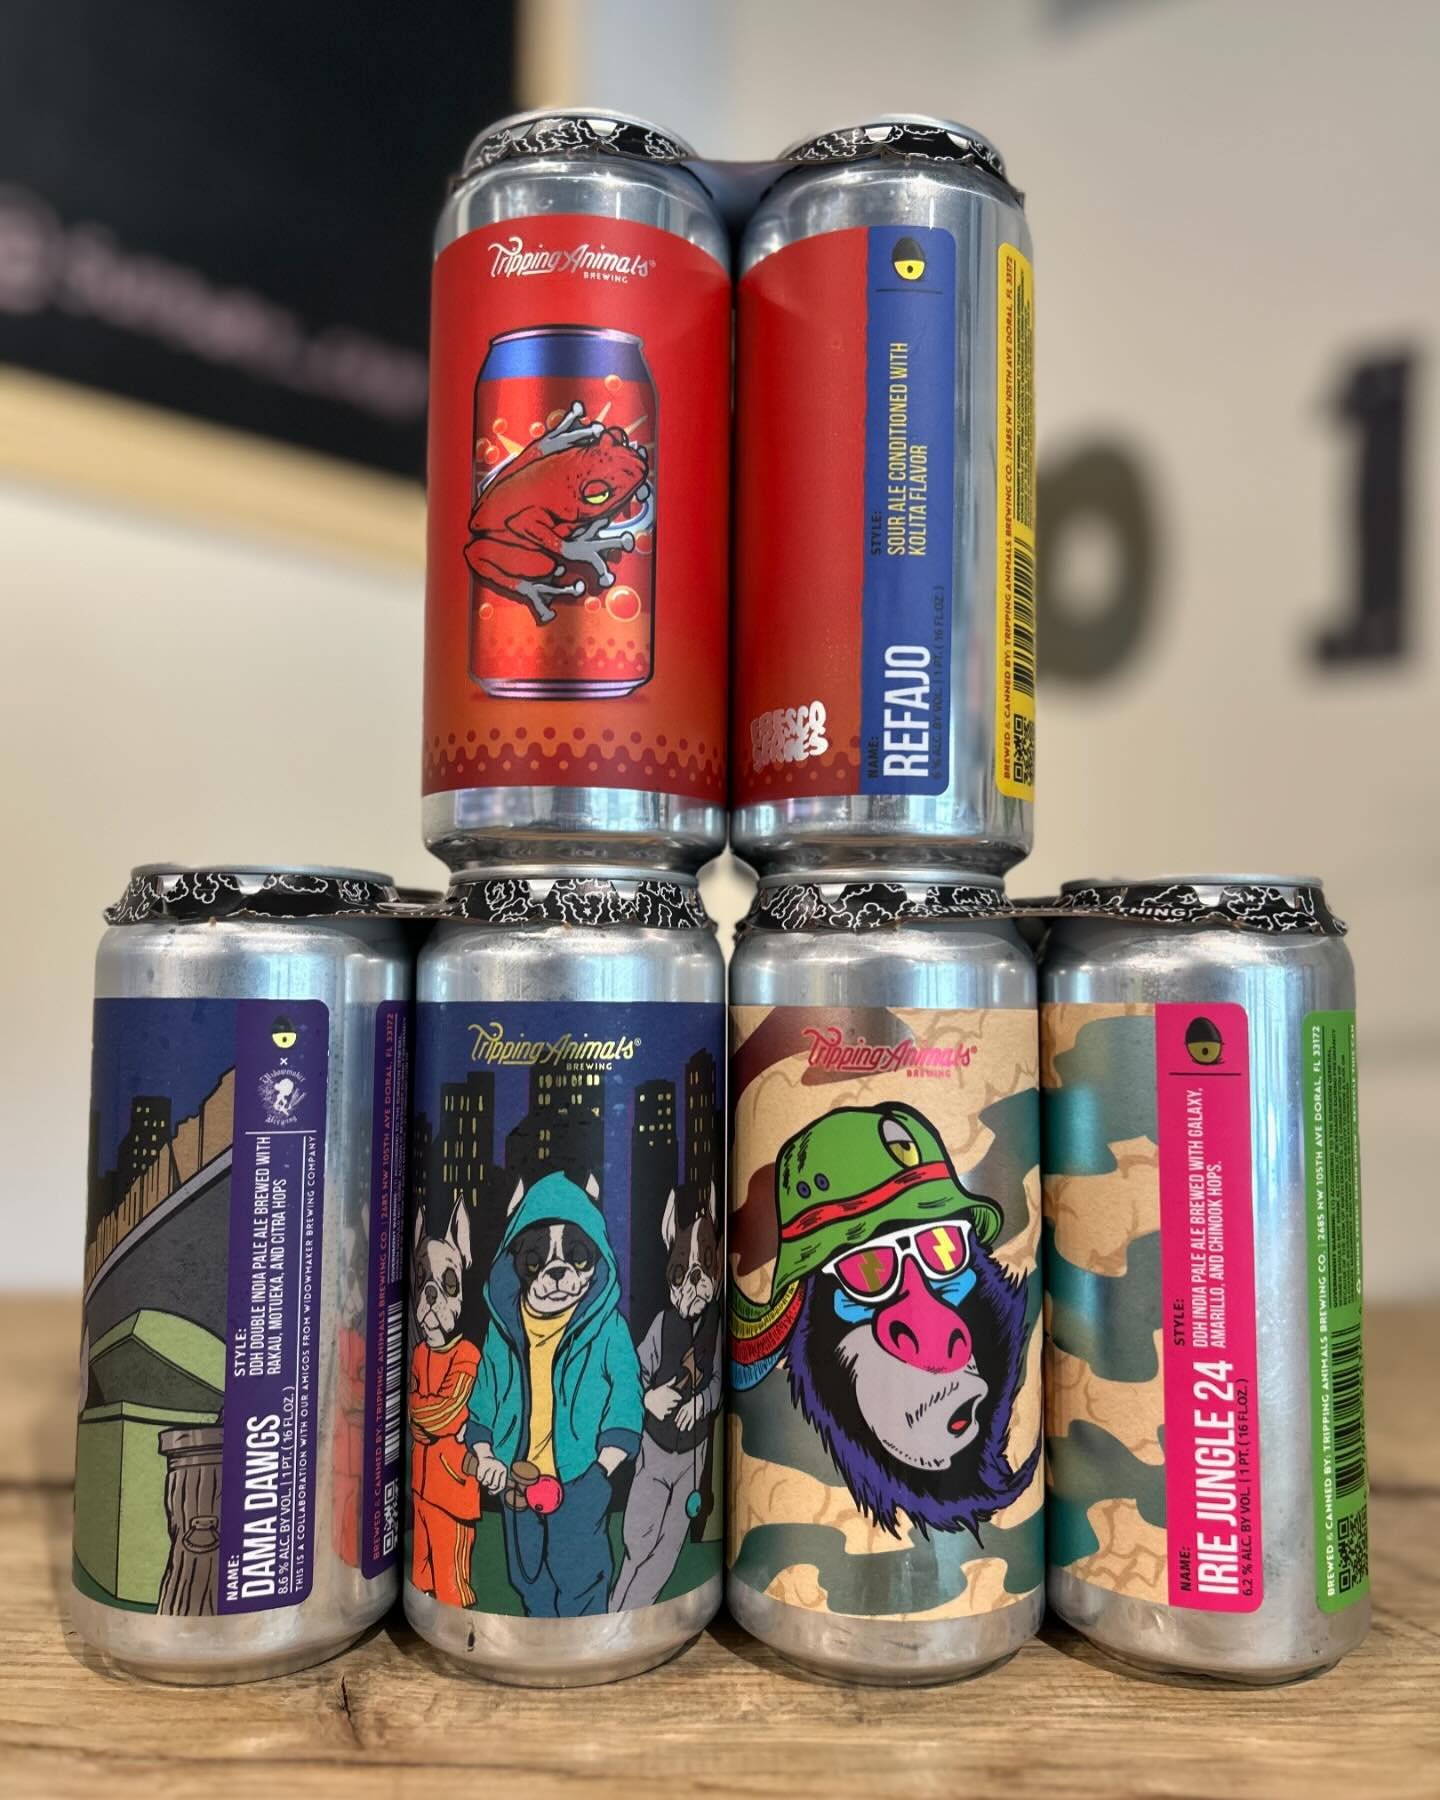 Welcoming @trippinganimalsbrewing back to the shop this week #NowAvailable #SudburyCraftBeer #SudburyMA
&mdash;
🥤 😋REFAJO😋🥤
🫧 FRESCO SERIES 🫧

Ahhhhh the simplicity and beauty of cracking a cold beer open, followed by a refreshing kolita soda, 